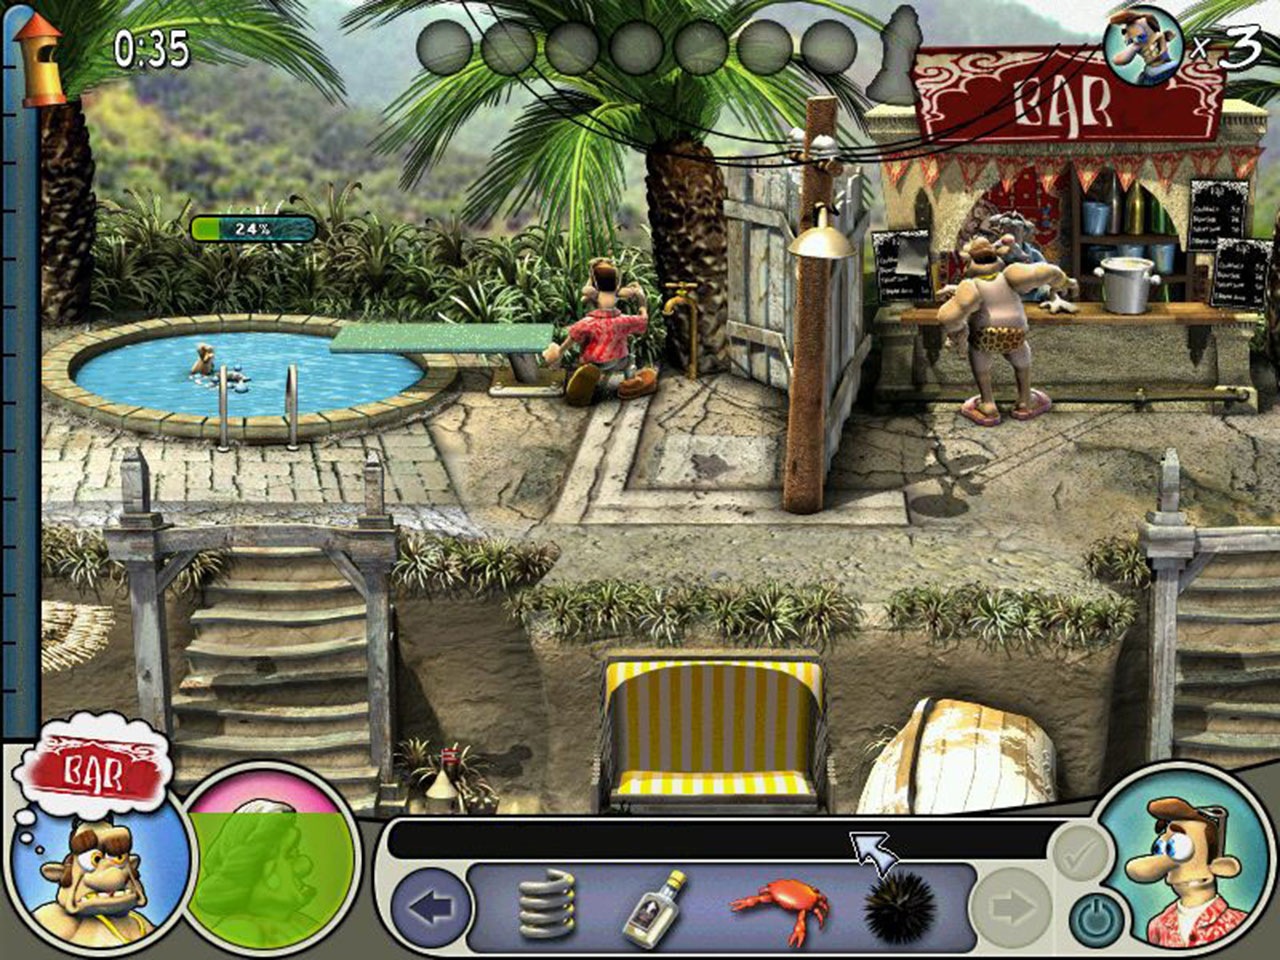 neighbours from hell 2 free download full game for pc